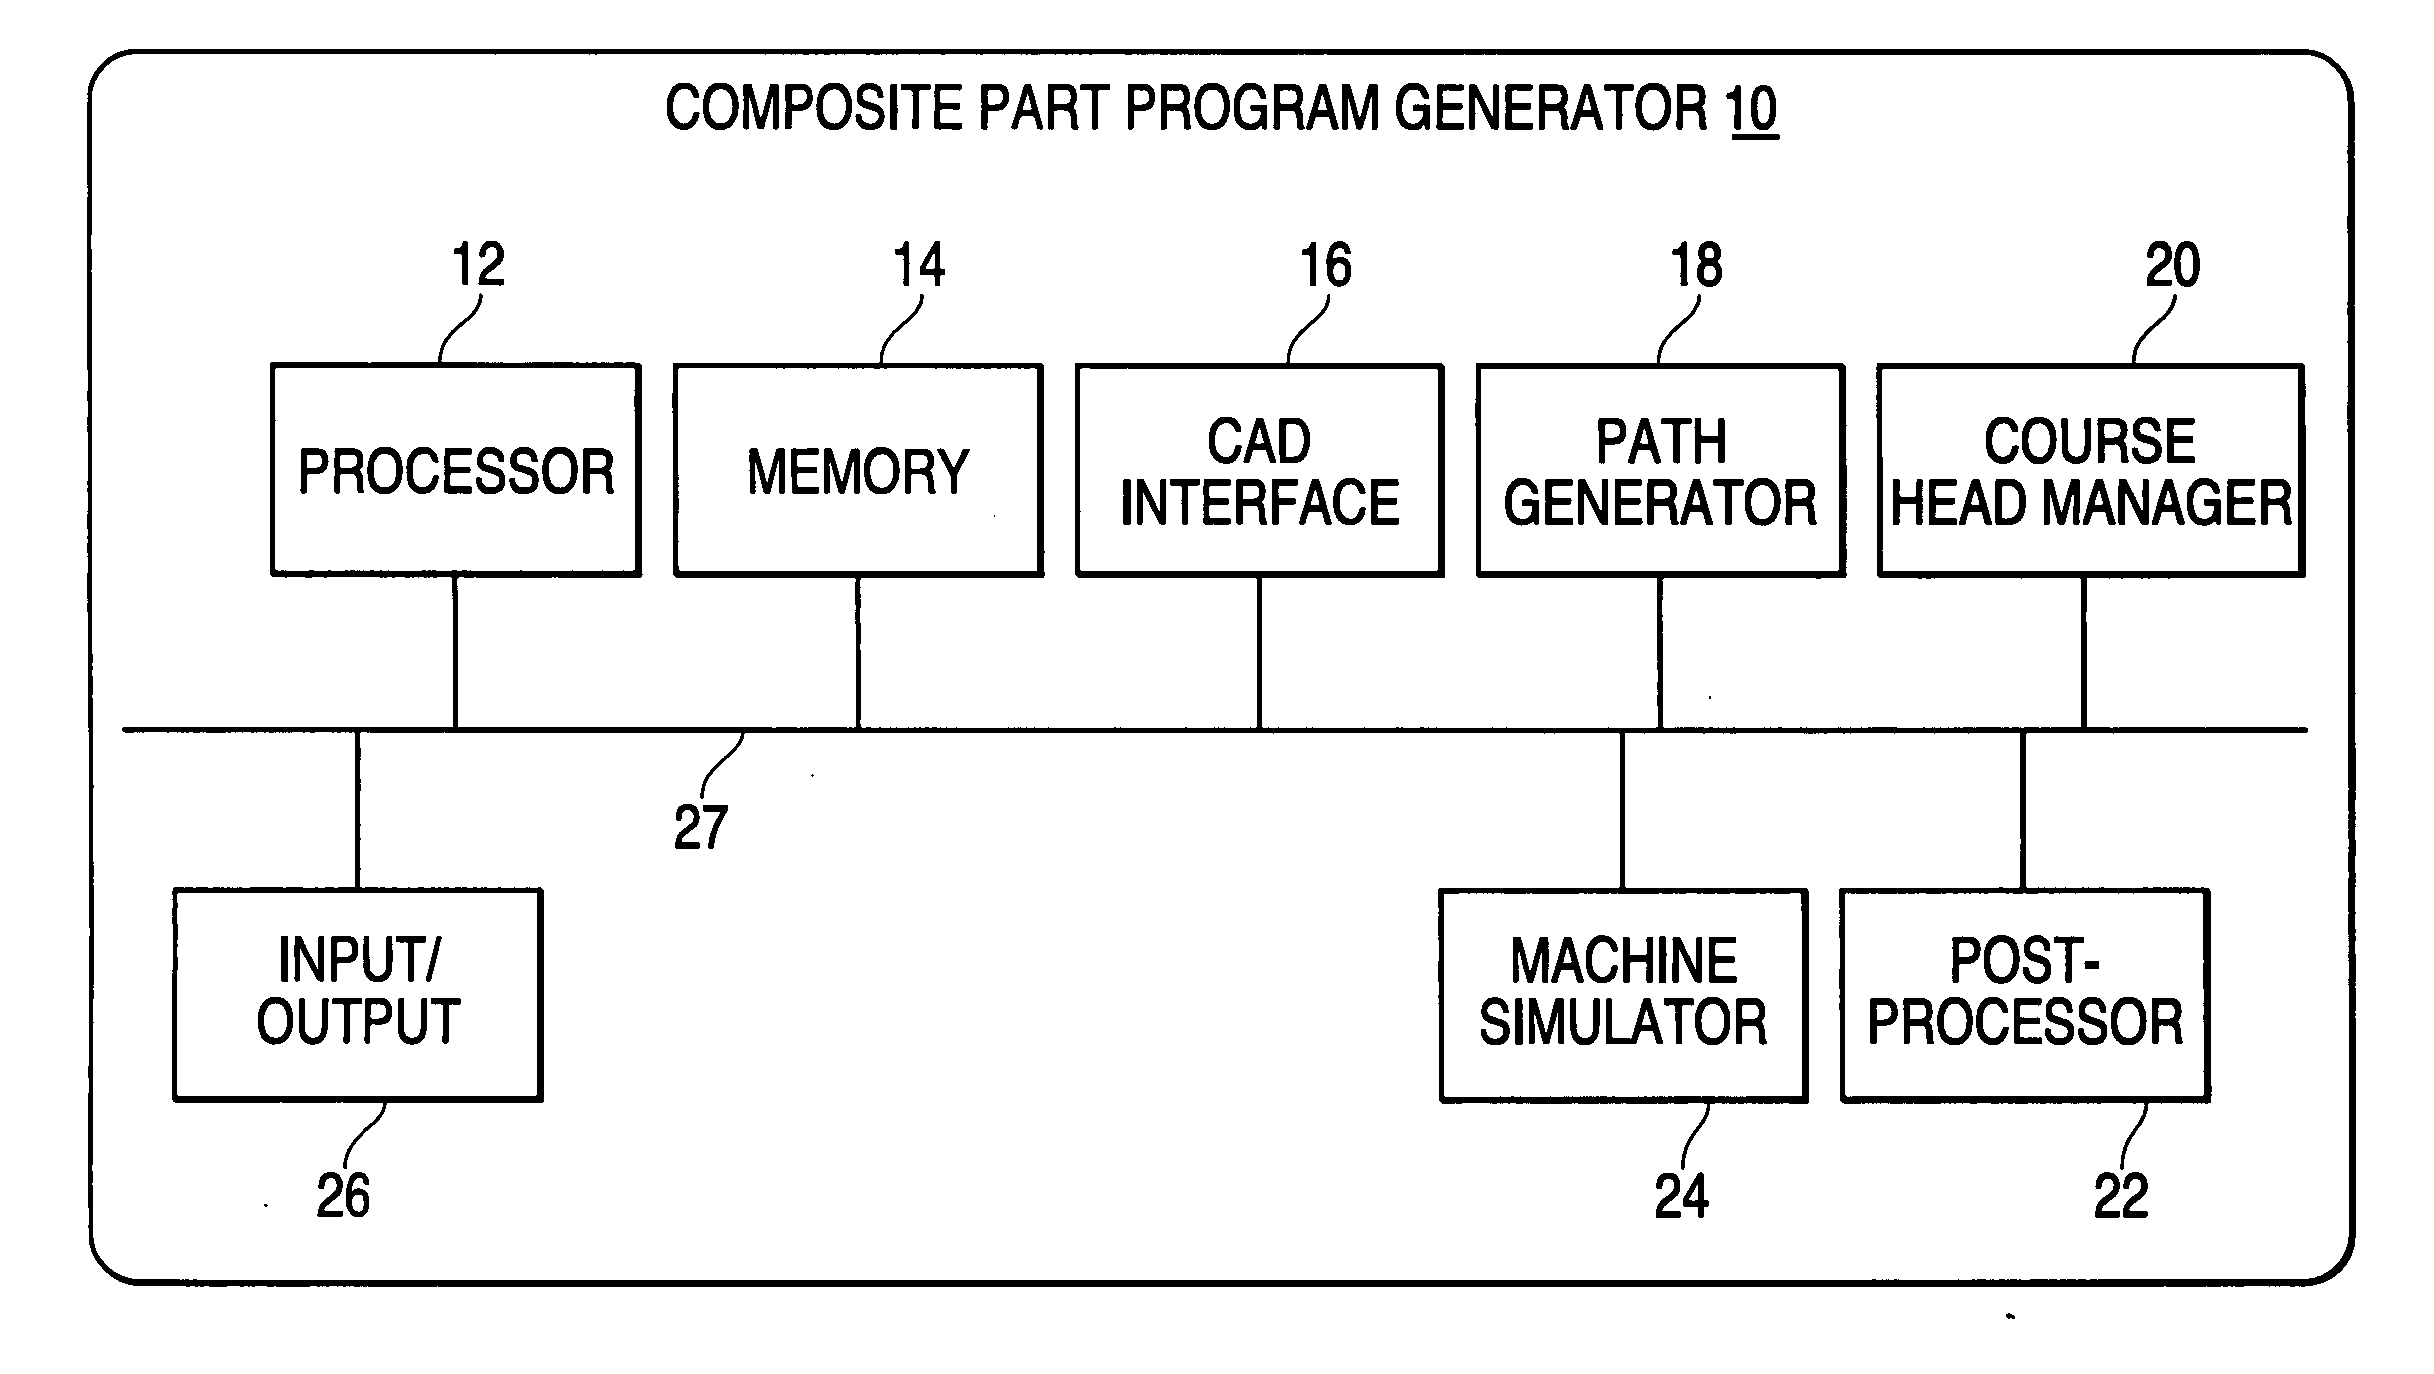 Multihead composite material application machine programming method and apparatus for manufacturing composite structures